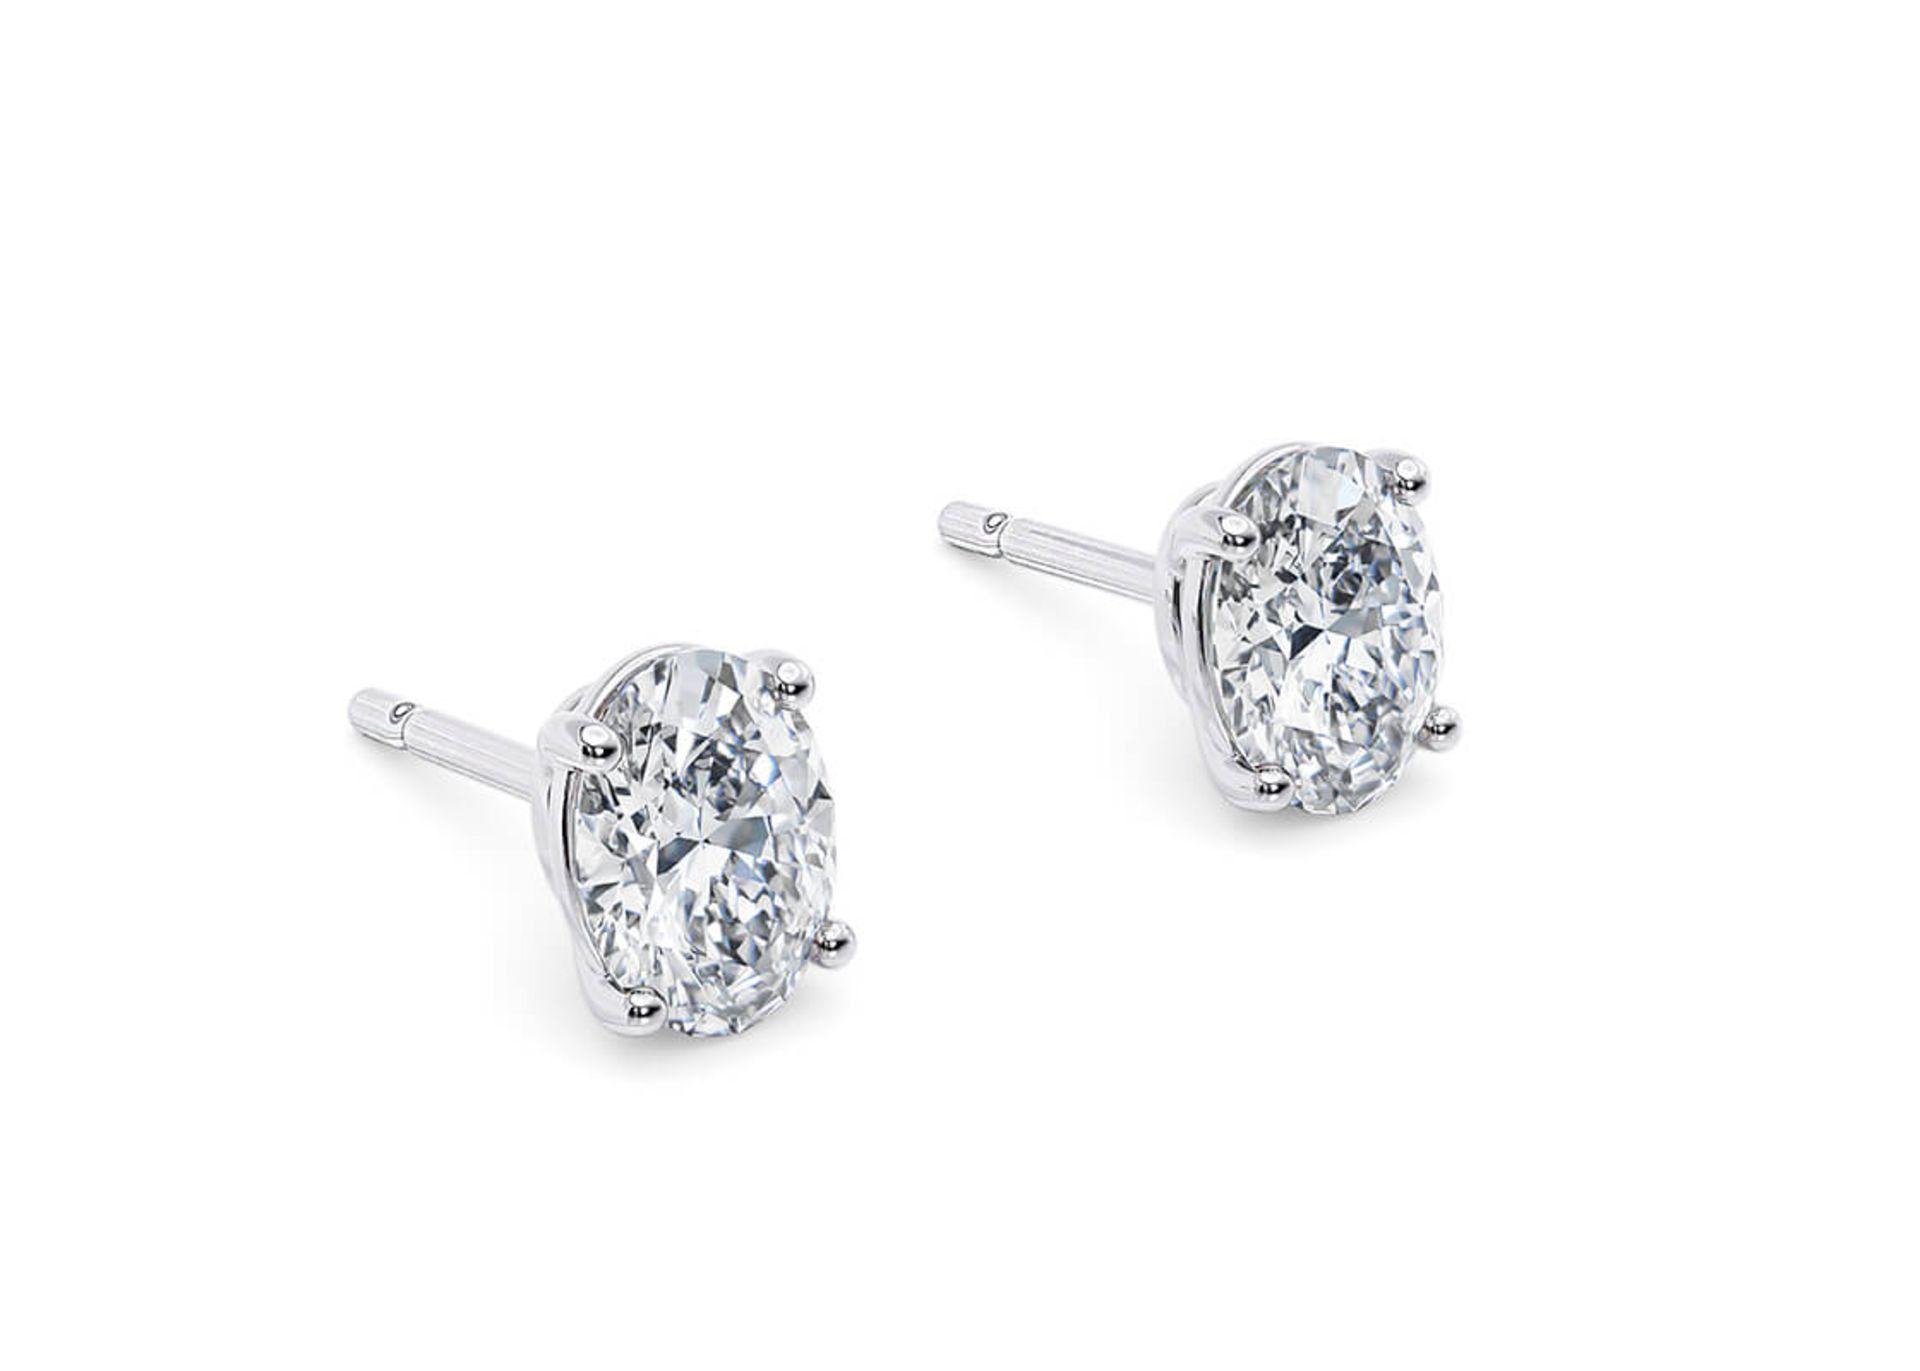 Oval Cut 4.00 Carat Natural Diamond Earrings Set in 18kt White Gold - G Colour SI Clarity - GIA - Image 2 of 3